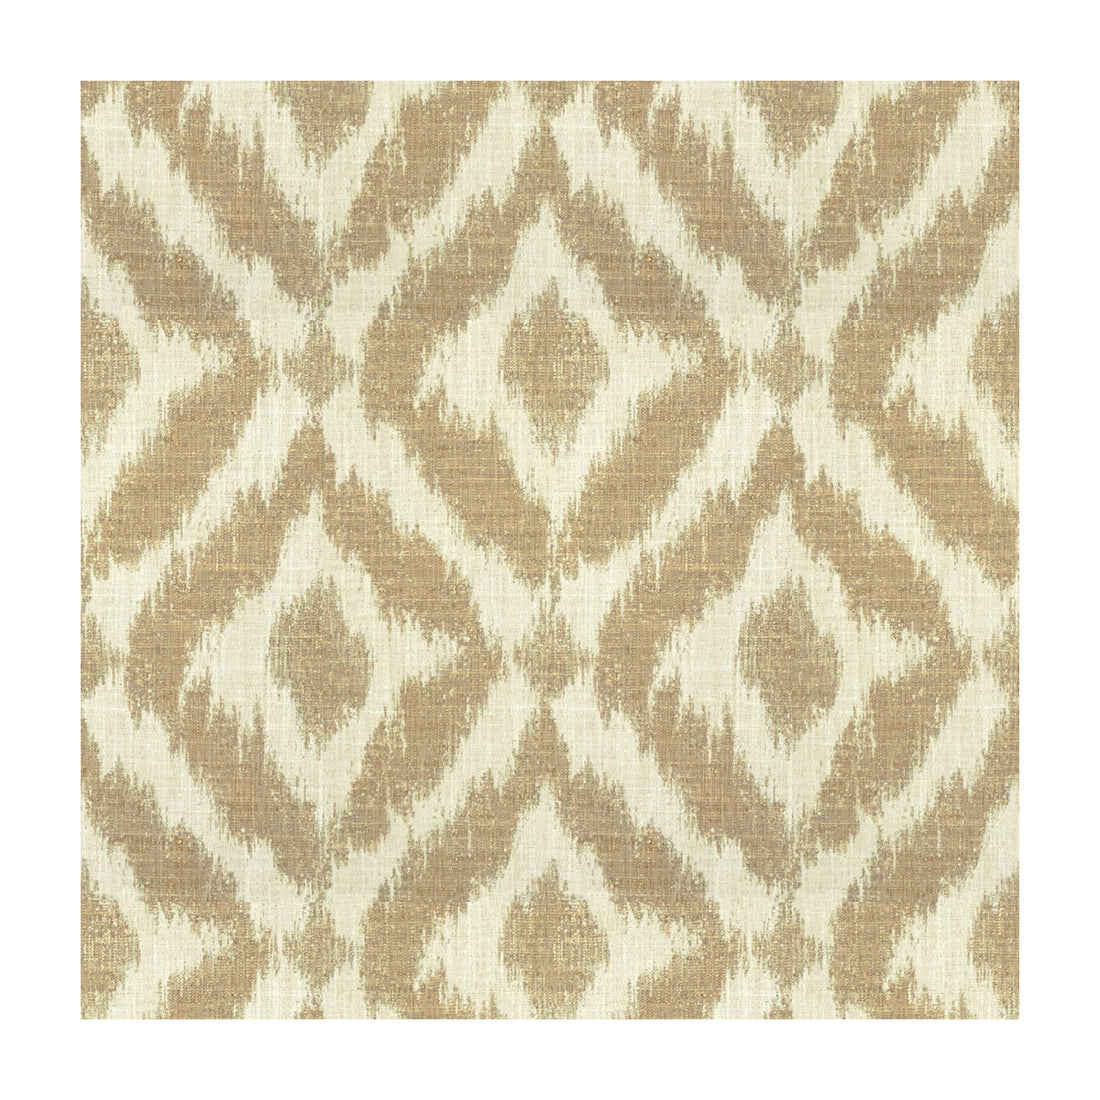 Lyra fabric in ivory/beige color - pattern 2015142.16.0 - by Lee Jofa in the Aerin 2 collection